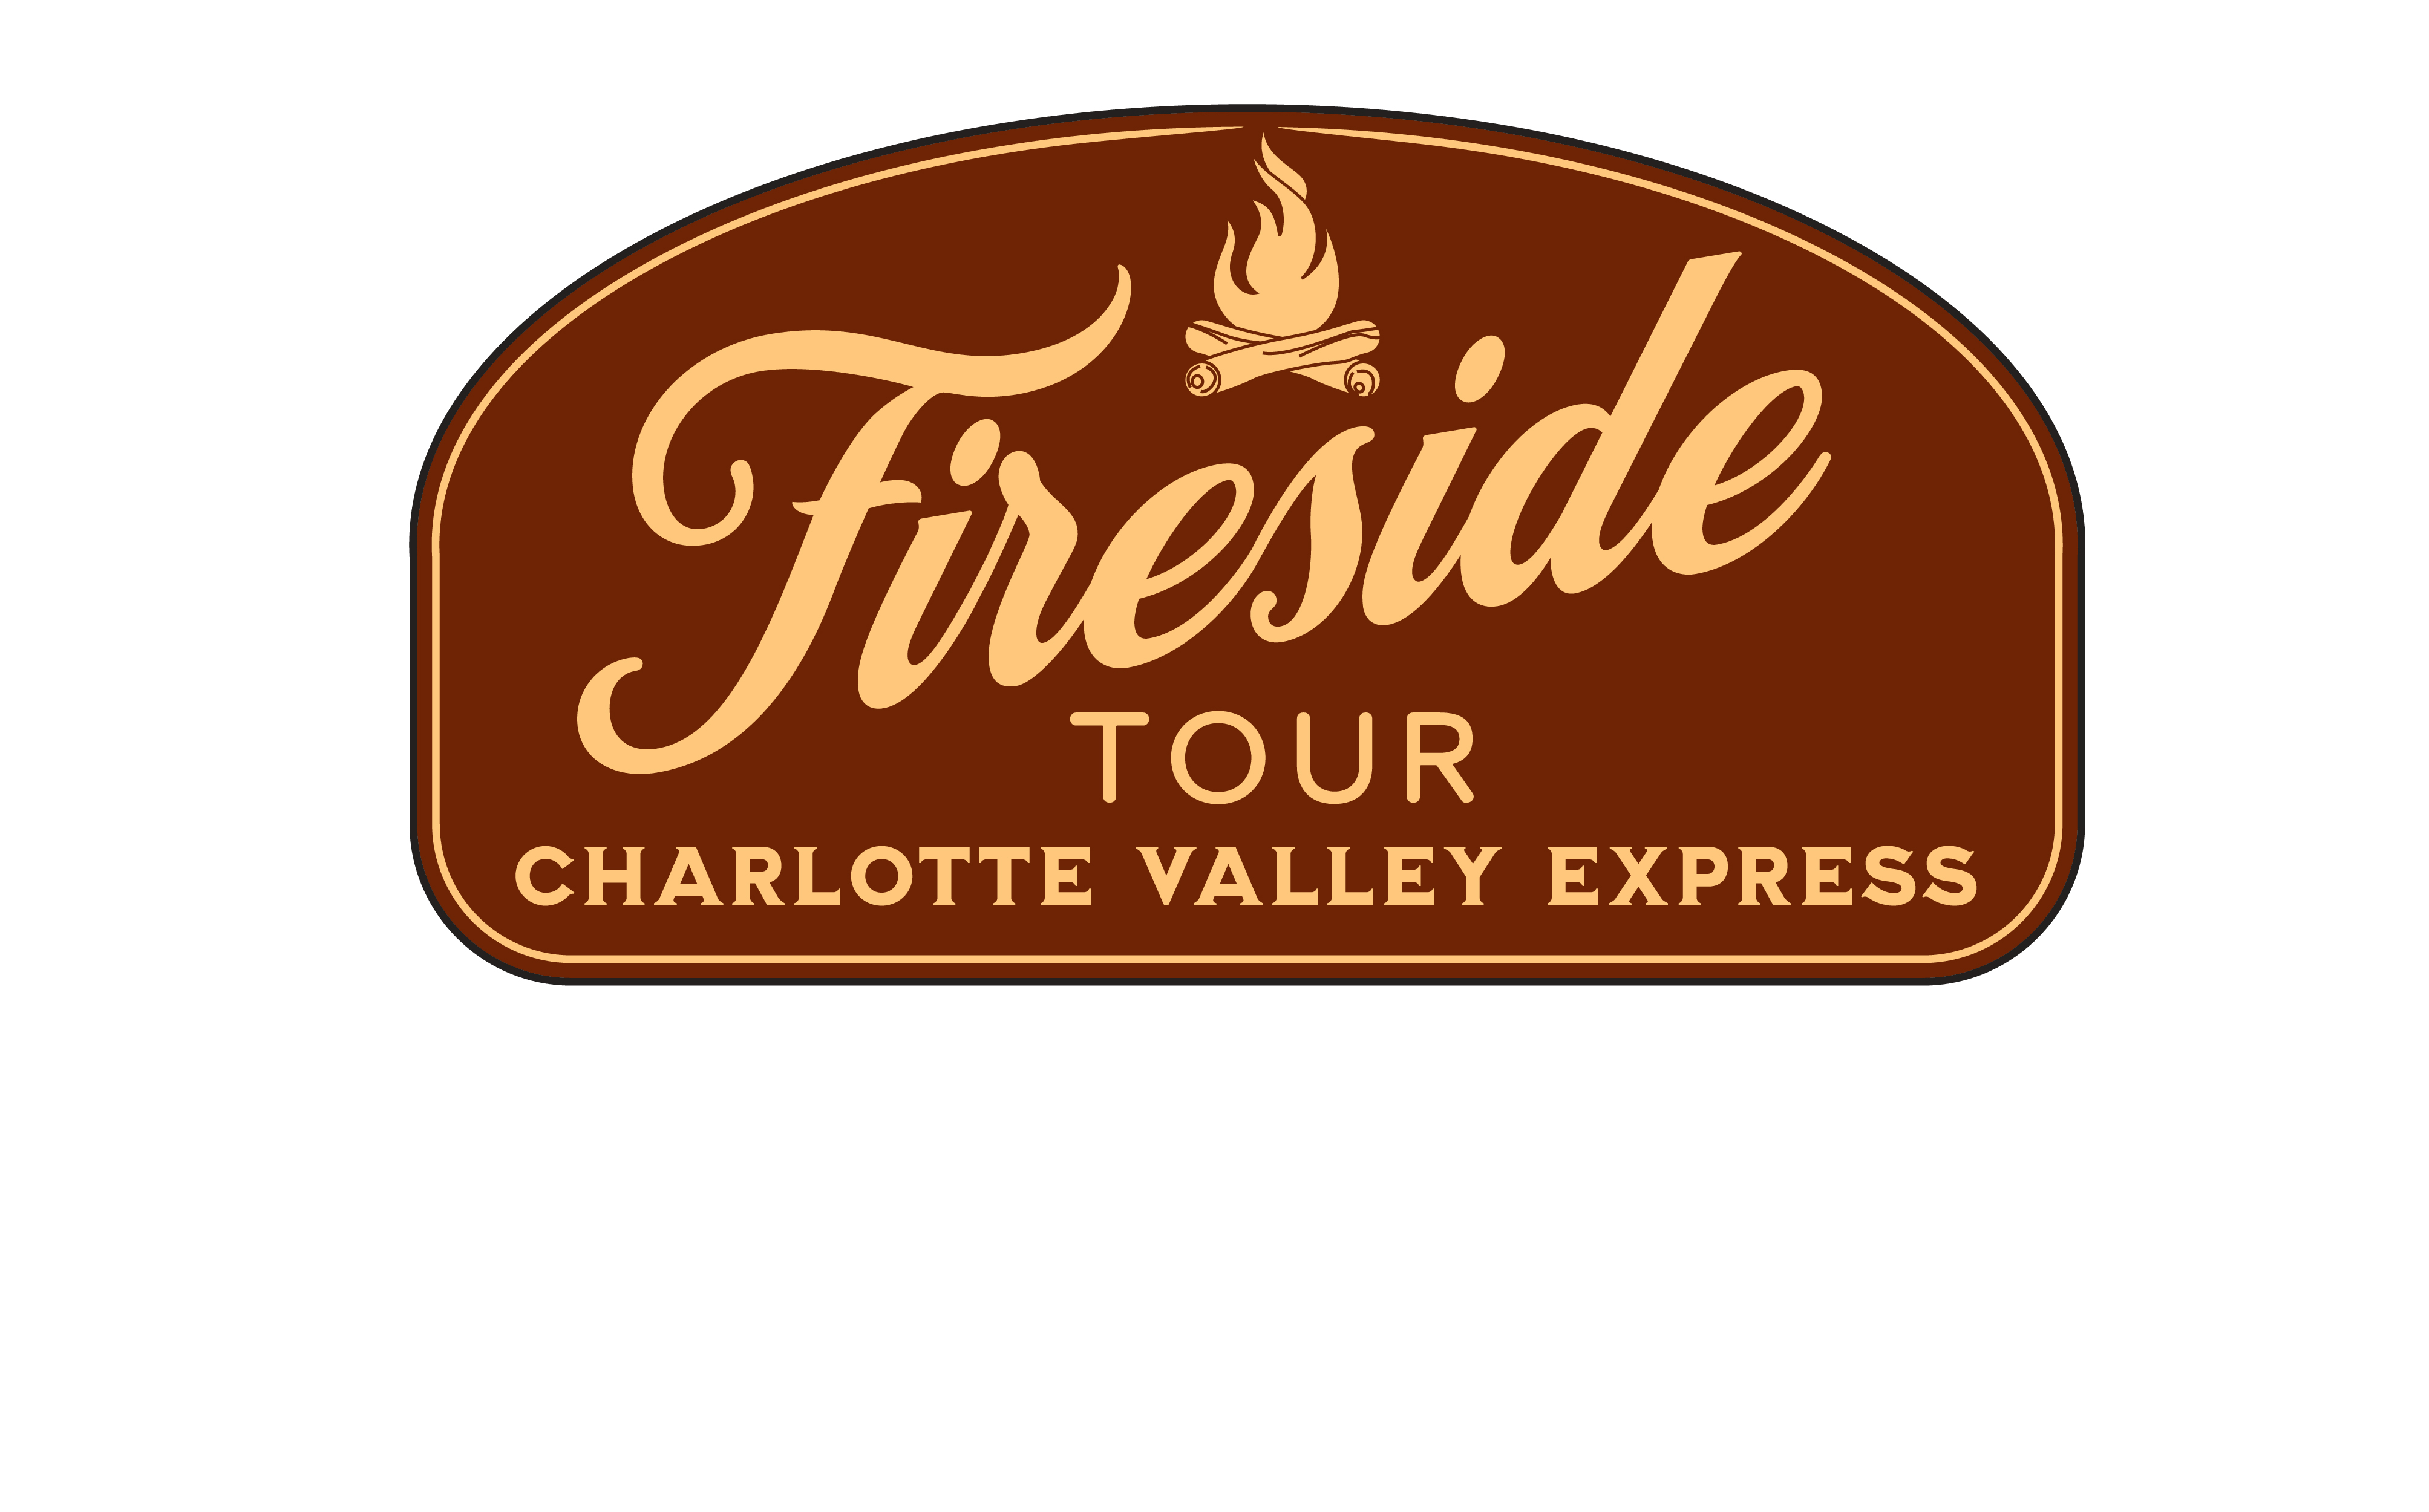 Cooperstown, NY: Charlotte Valley Fireside Tour